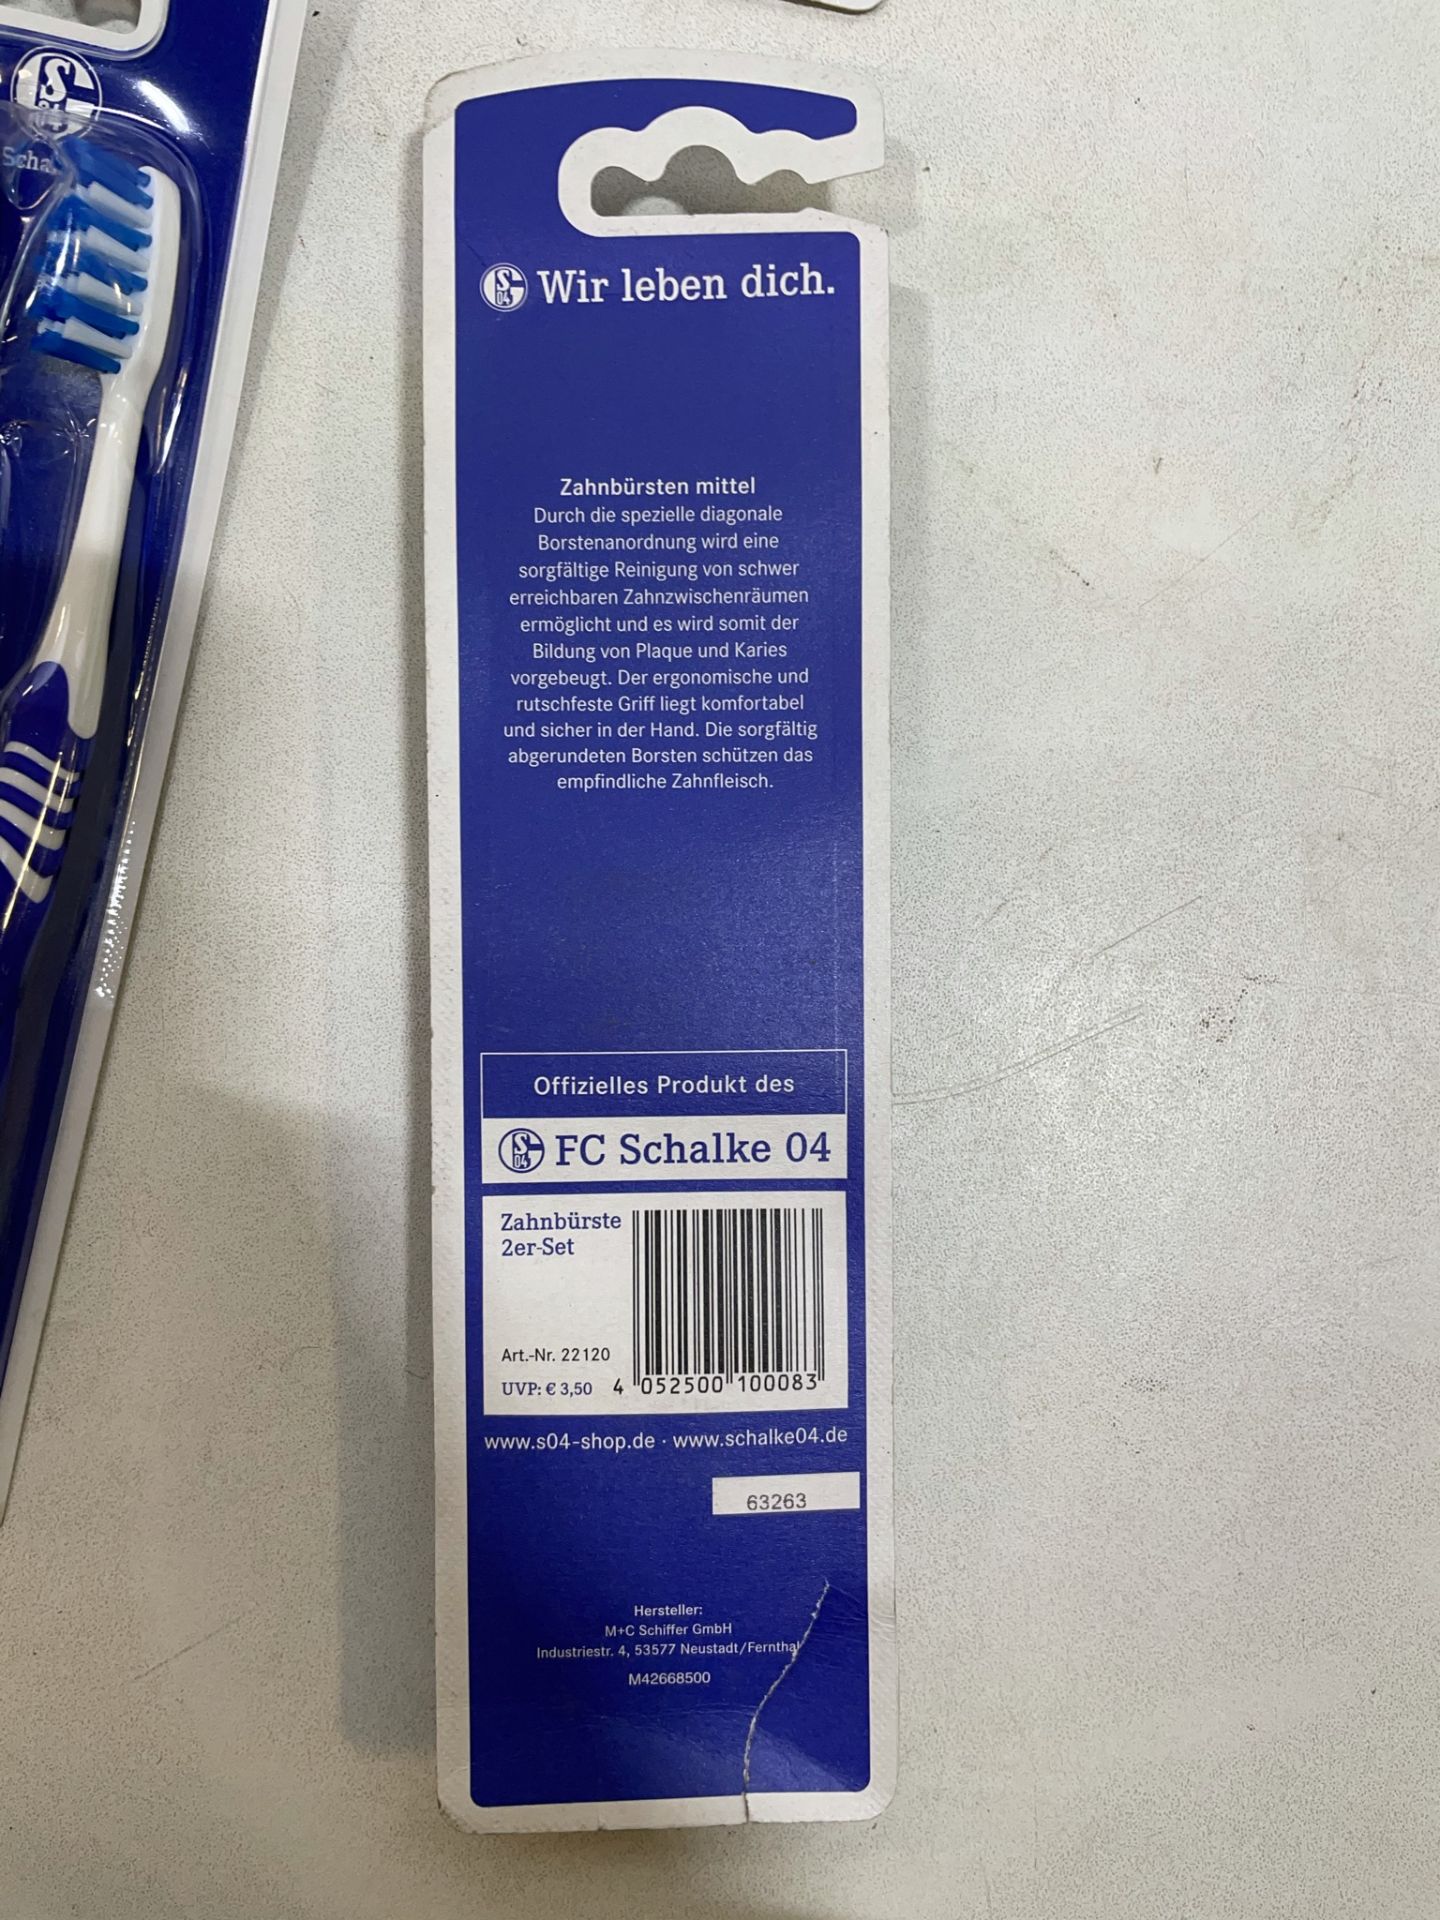 9 x Twin Pack FC Schalke 04 Toothbrushes - Image 2 of 2